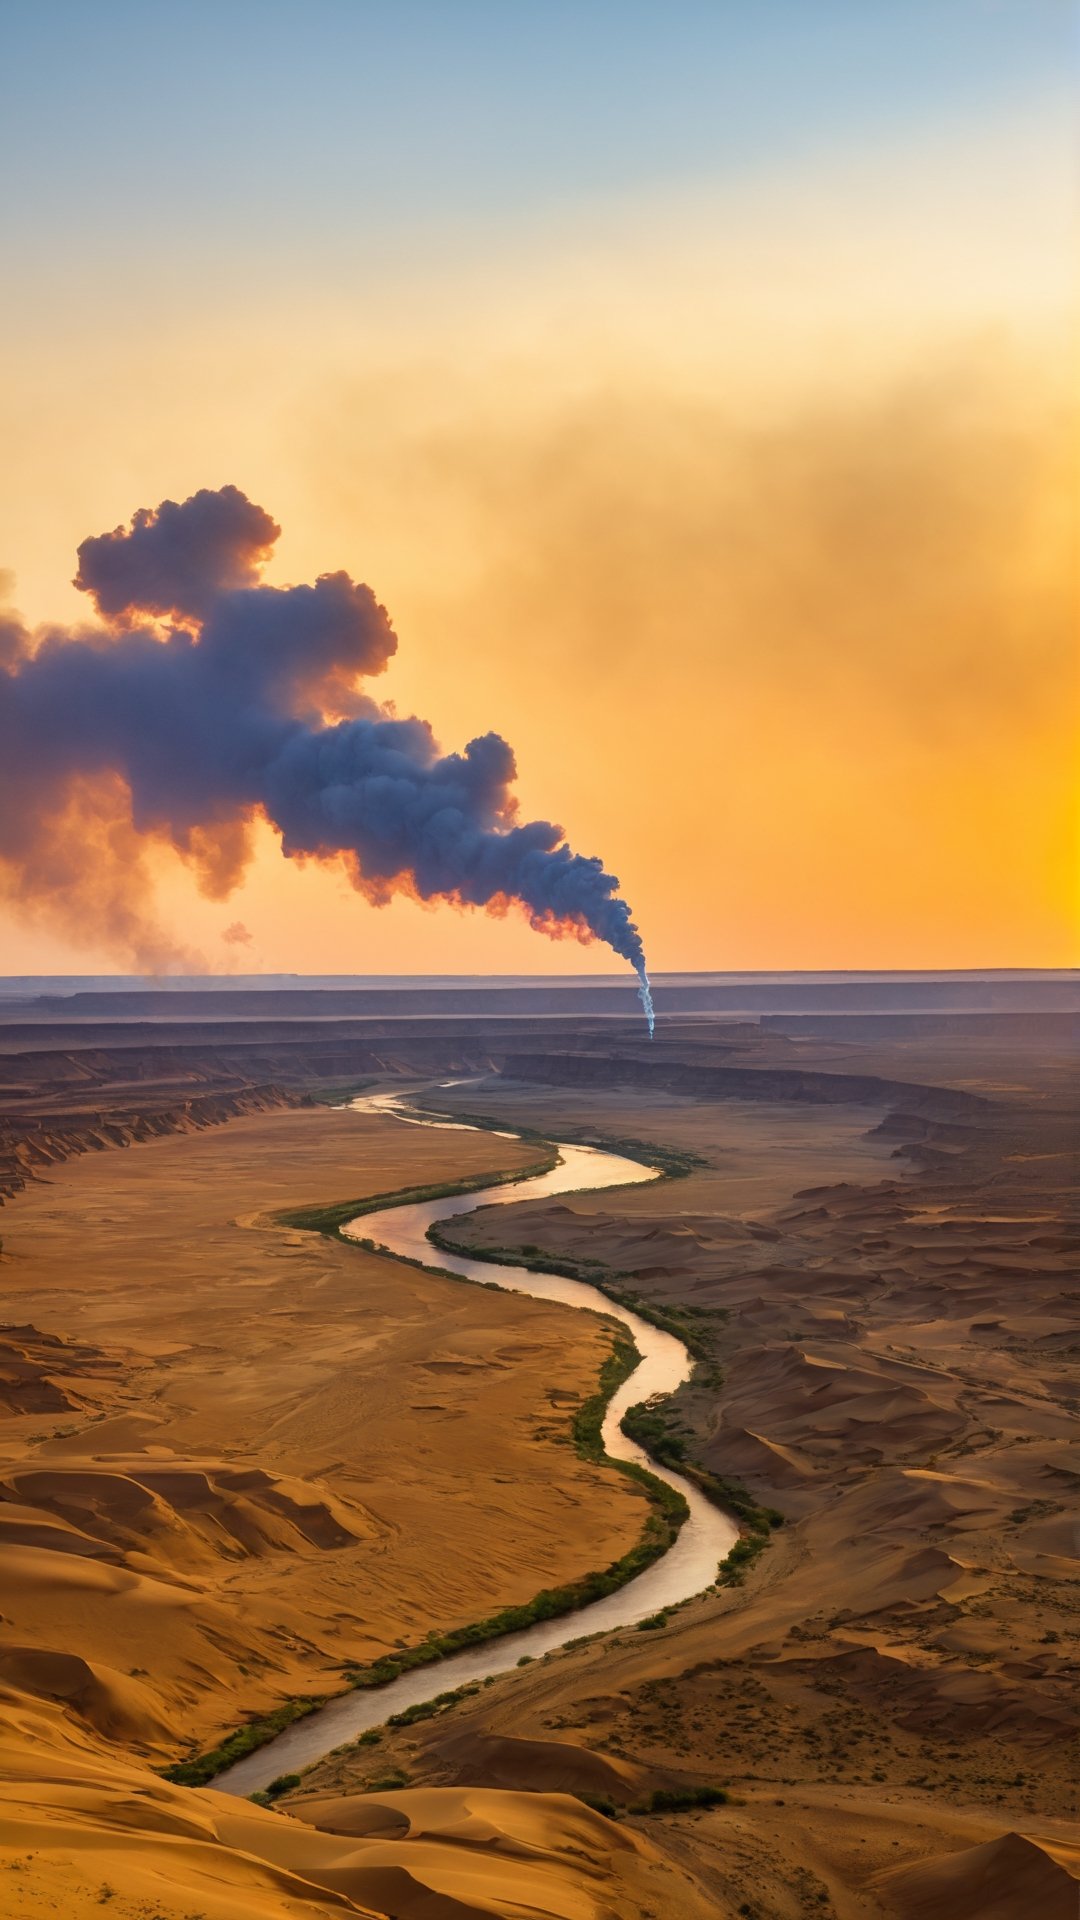 On the great desert, a lone column of smoke straight up; Over the long river the setting sun is round